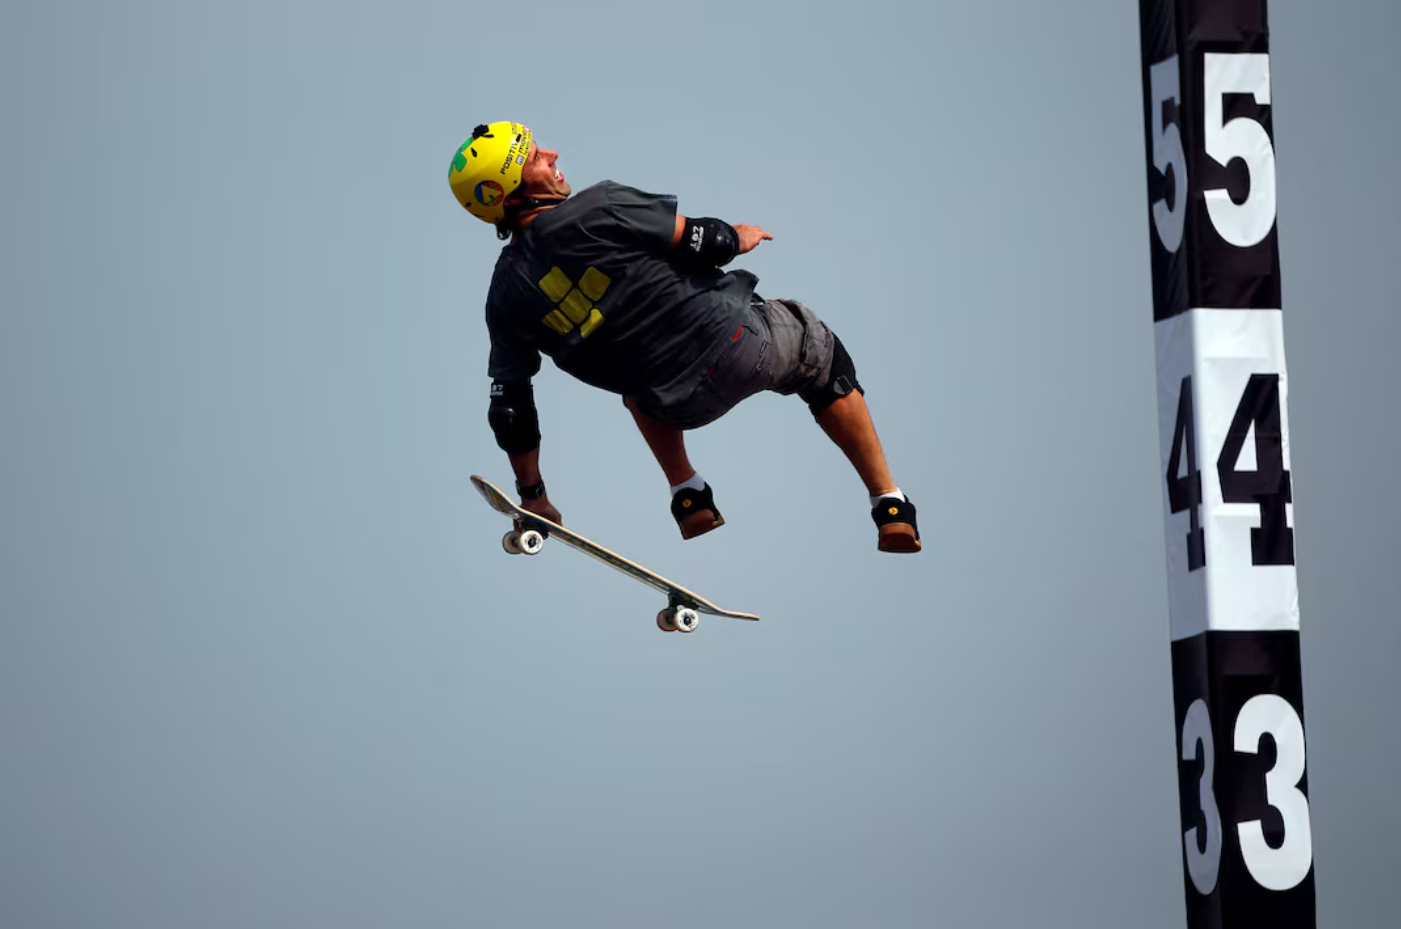 Andy Macdonald of Britain competes in the SKB Mini-Mega final at the World Extreme Games in east China's Shanghai Municipality, May 2, 2014. /Reuters